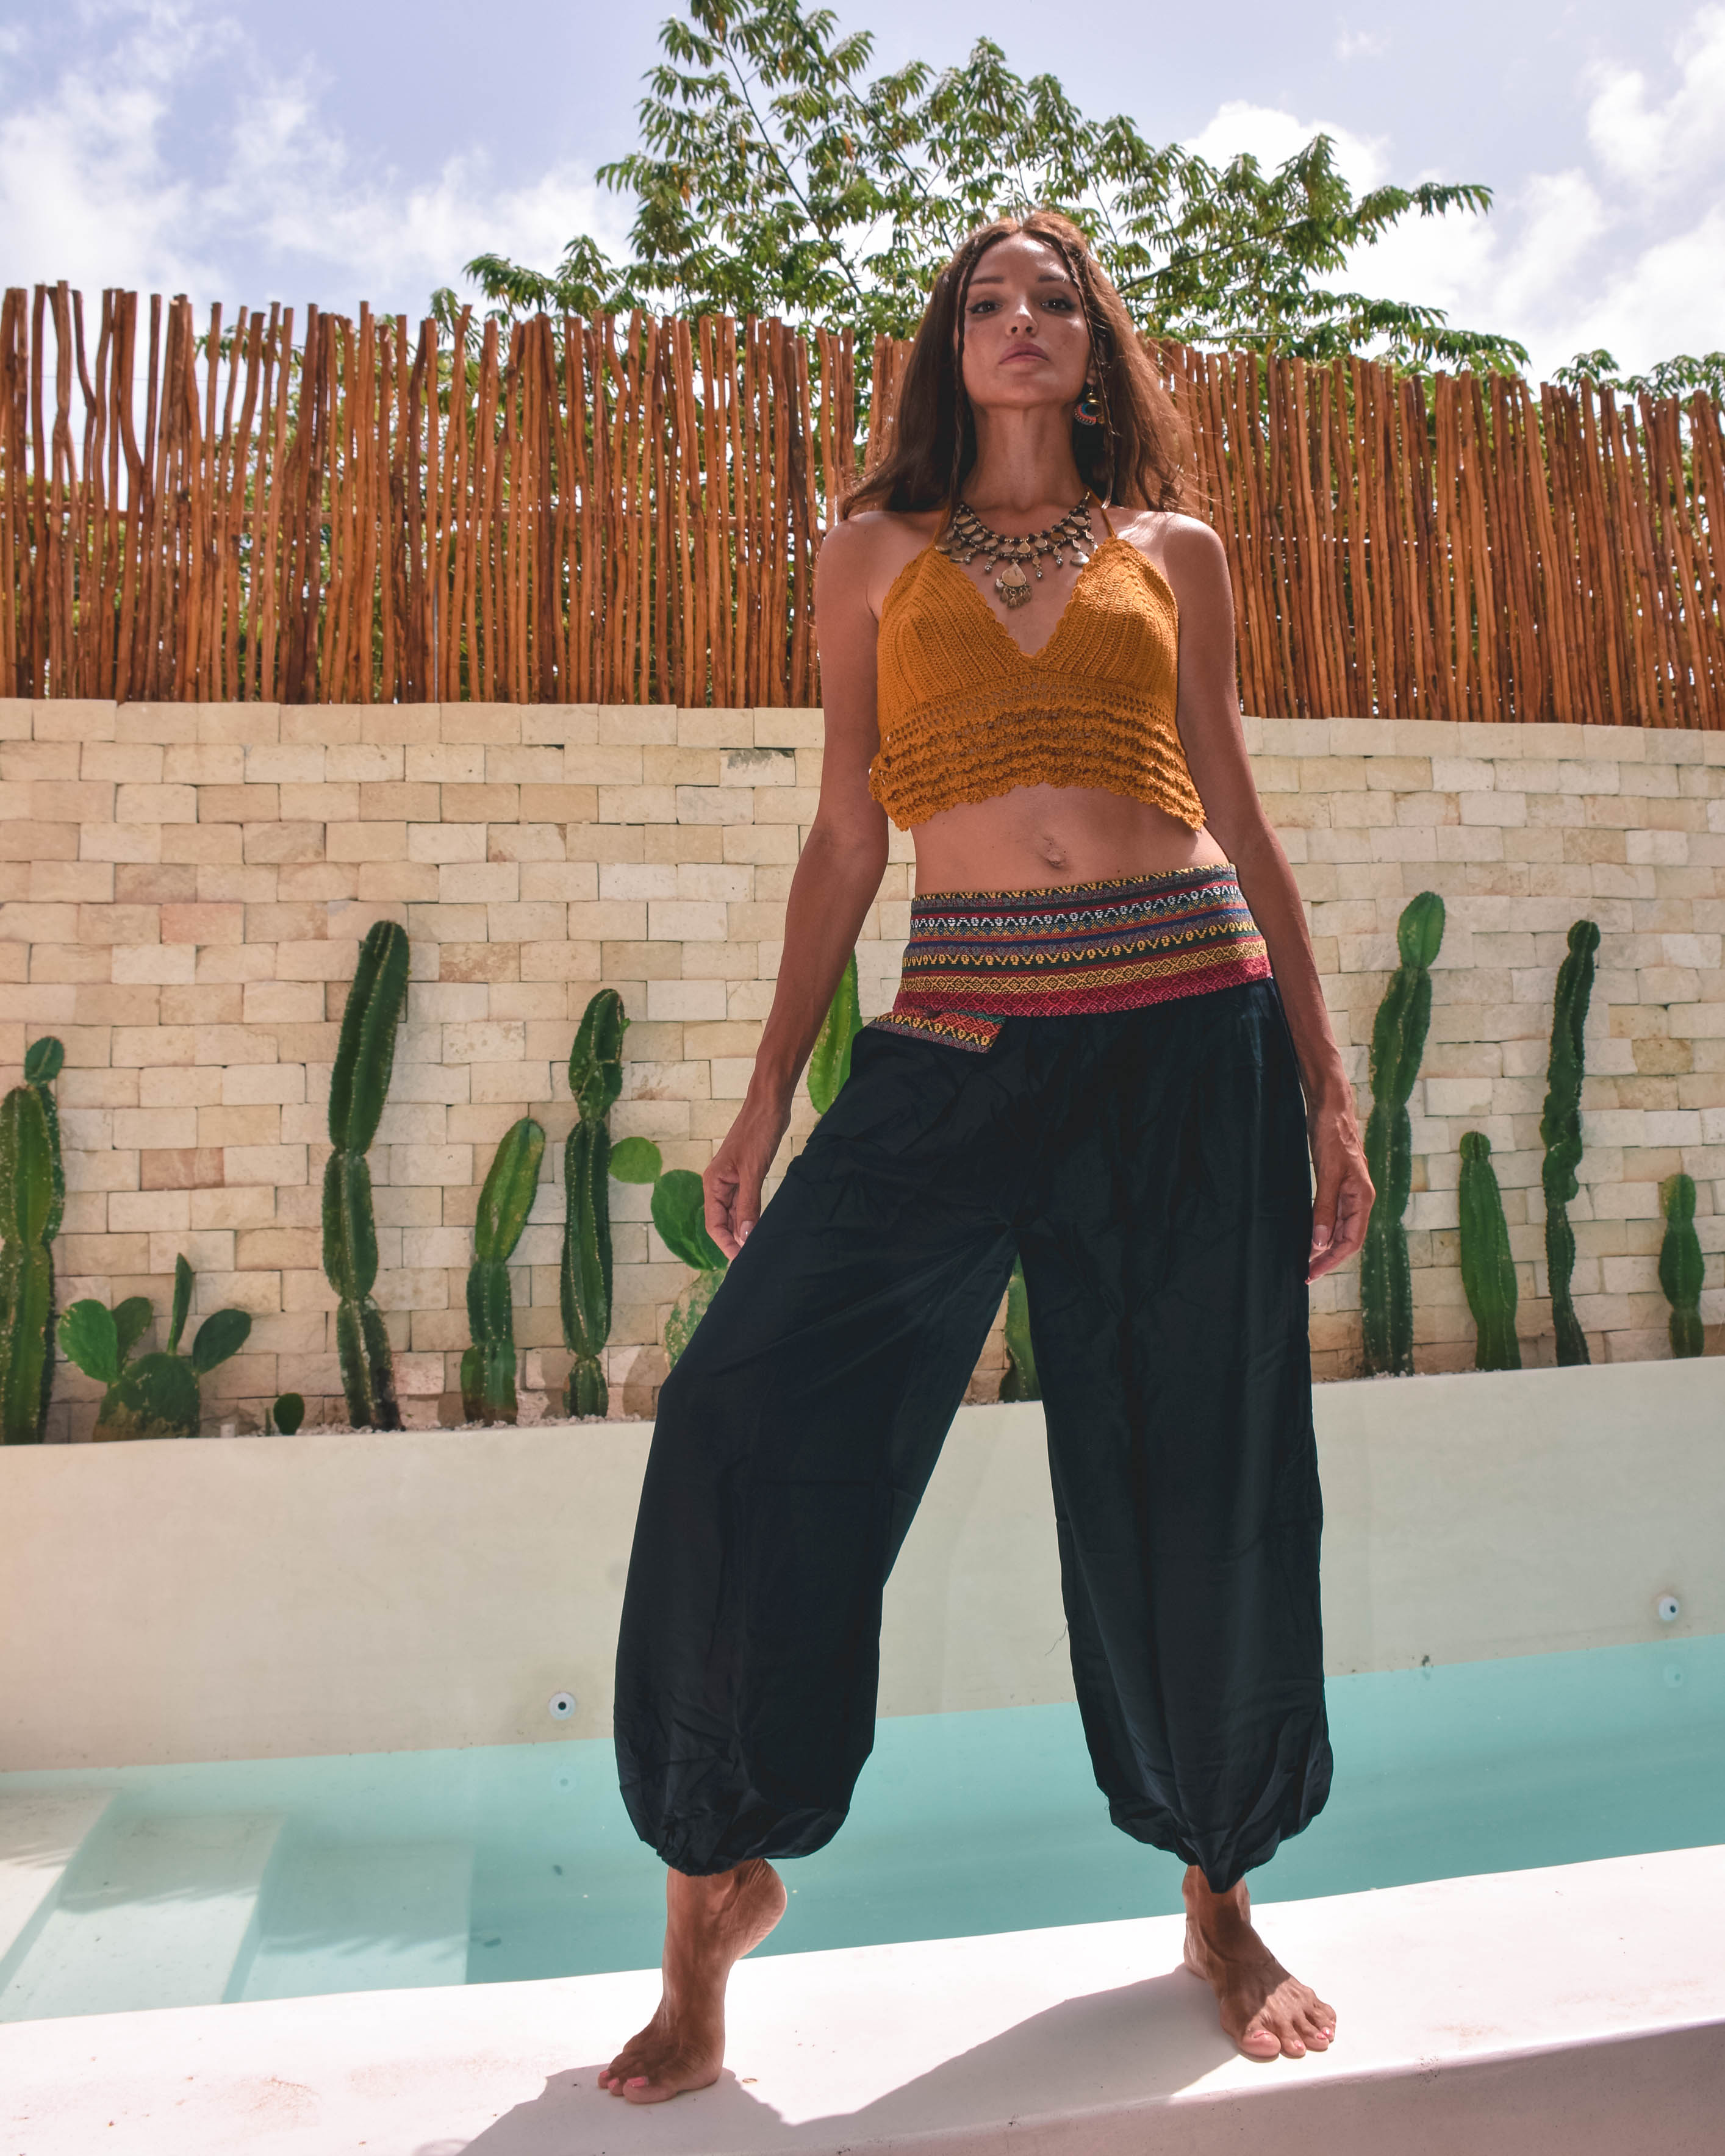 ALO PANTS Elepanta Unisex Casual Pants - Buy Today Elephant Pants Jewelry And Bohemian Clothes Handmade In Thailand Help To Save The Elephants FairTrade And Vegan